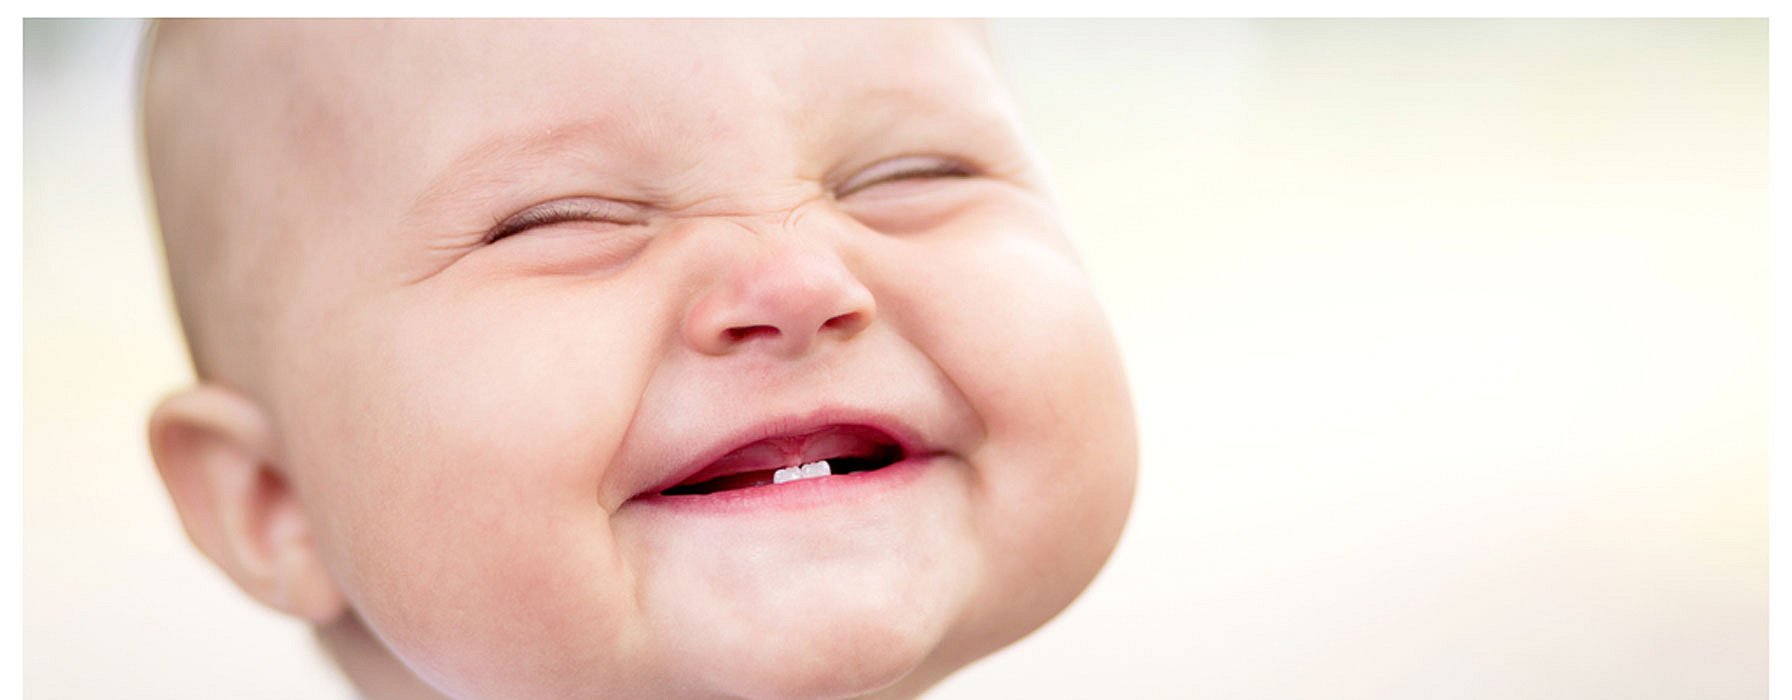 Baby with two bottom teeth grinning